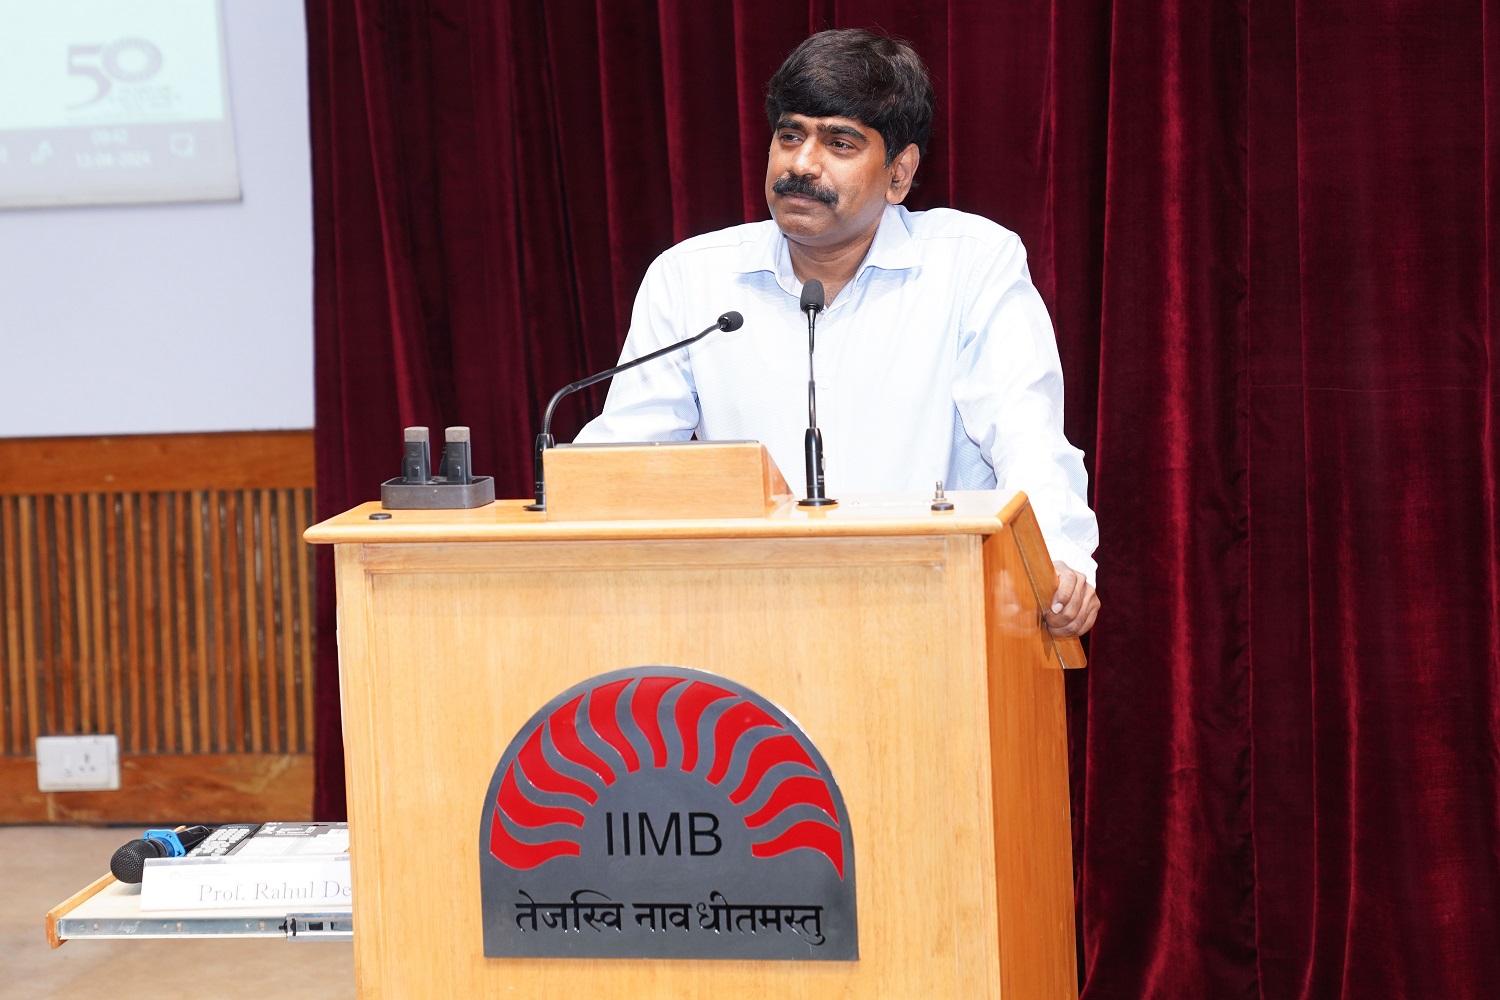 Prof. U Dinesh Kumar, Dean, Faculty, Chairperson, Data Centre & Analytics Lab and faculty in the Decision Sciences area of IIMB, in his address pointed out that in the age of emerging technologies like Generative AI which has far-reaching impact, and which may result in five to ten percent jobs disappearing or changing the way those are done currently, the students need to be ready for that kind of augmentation.